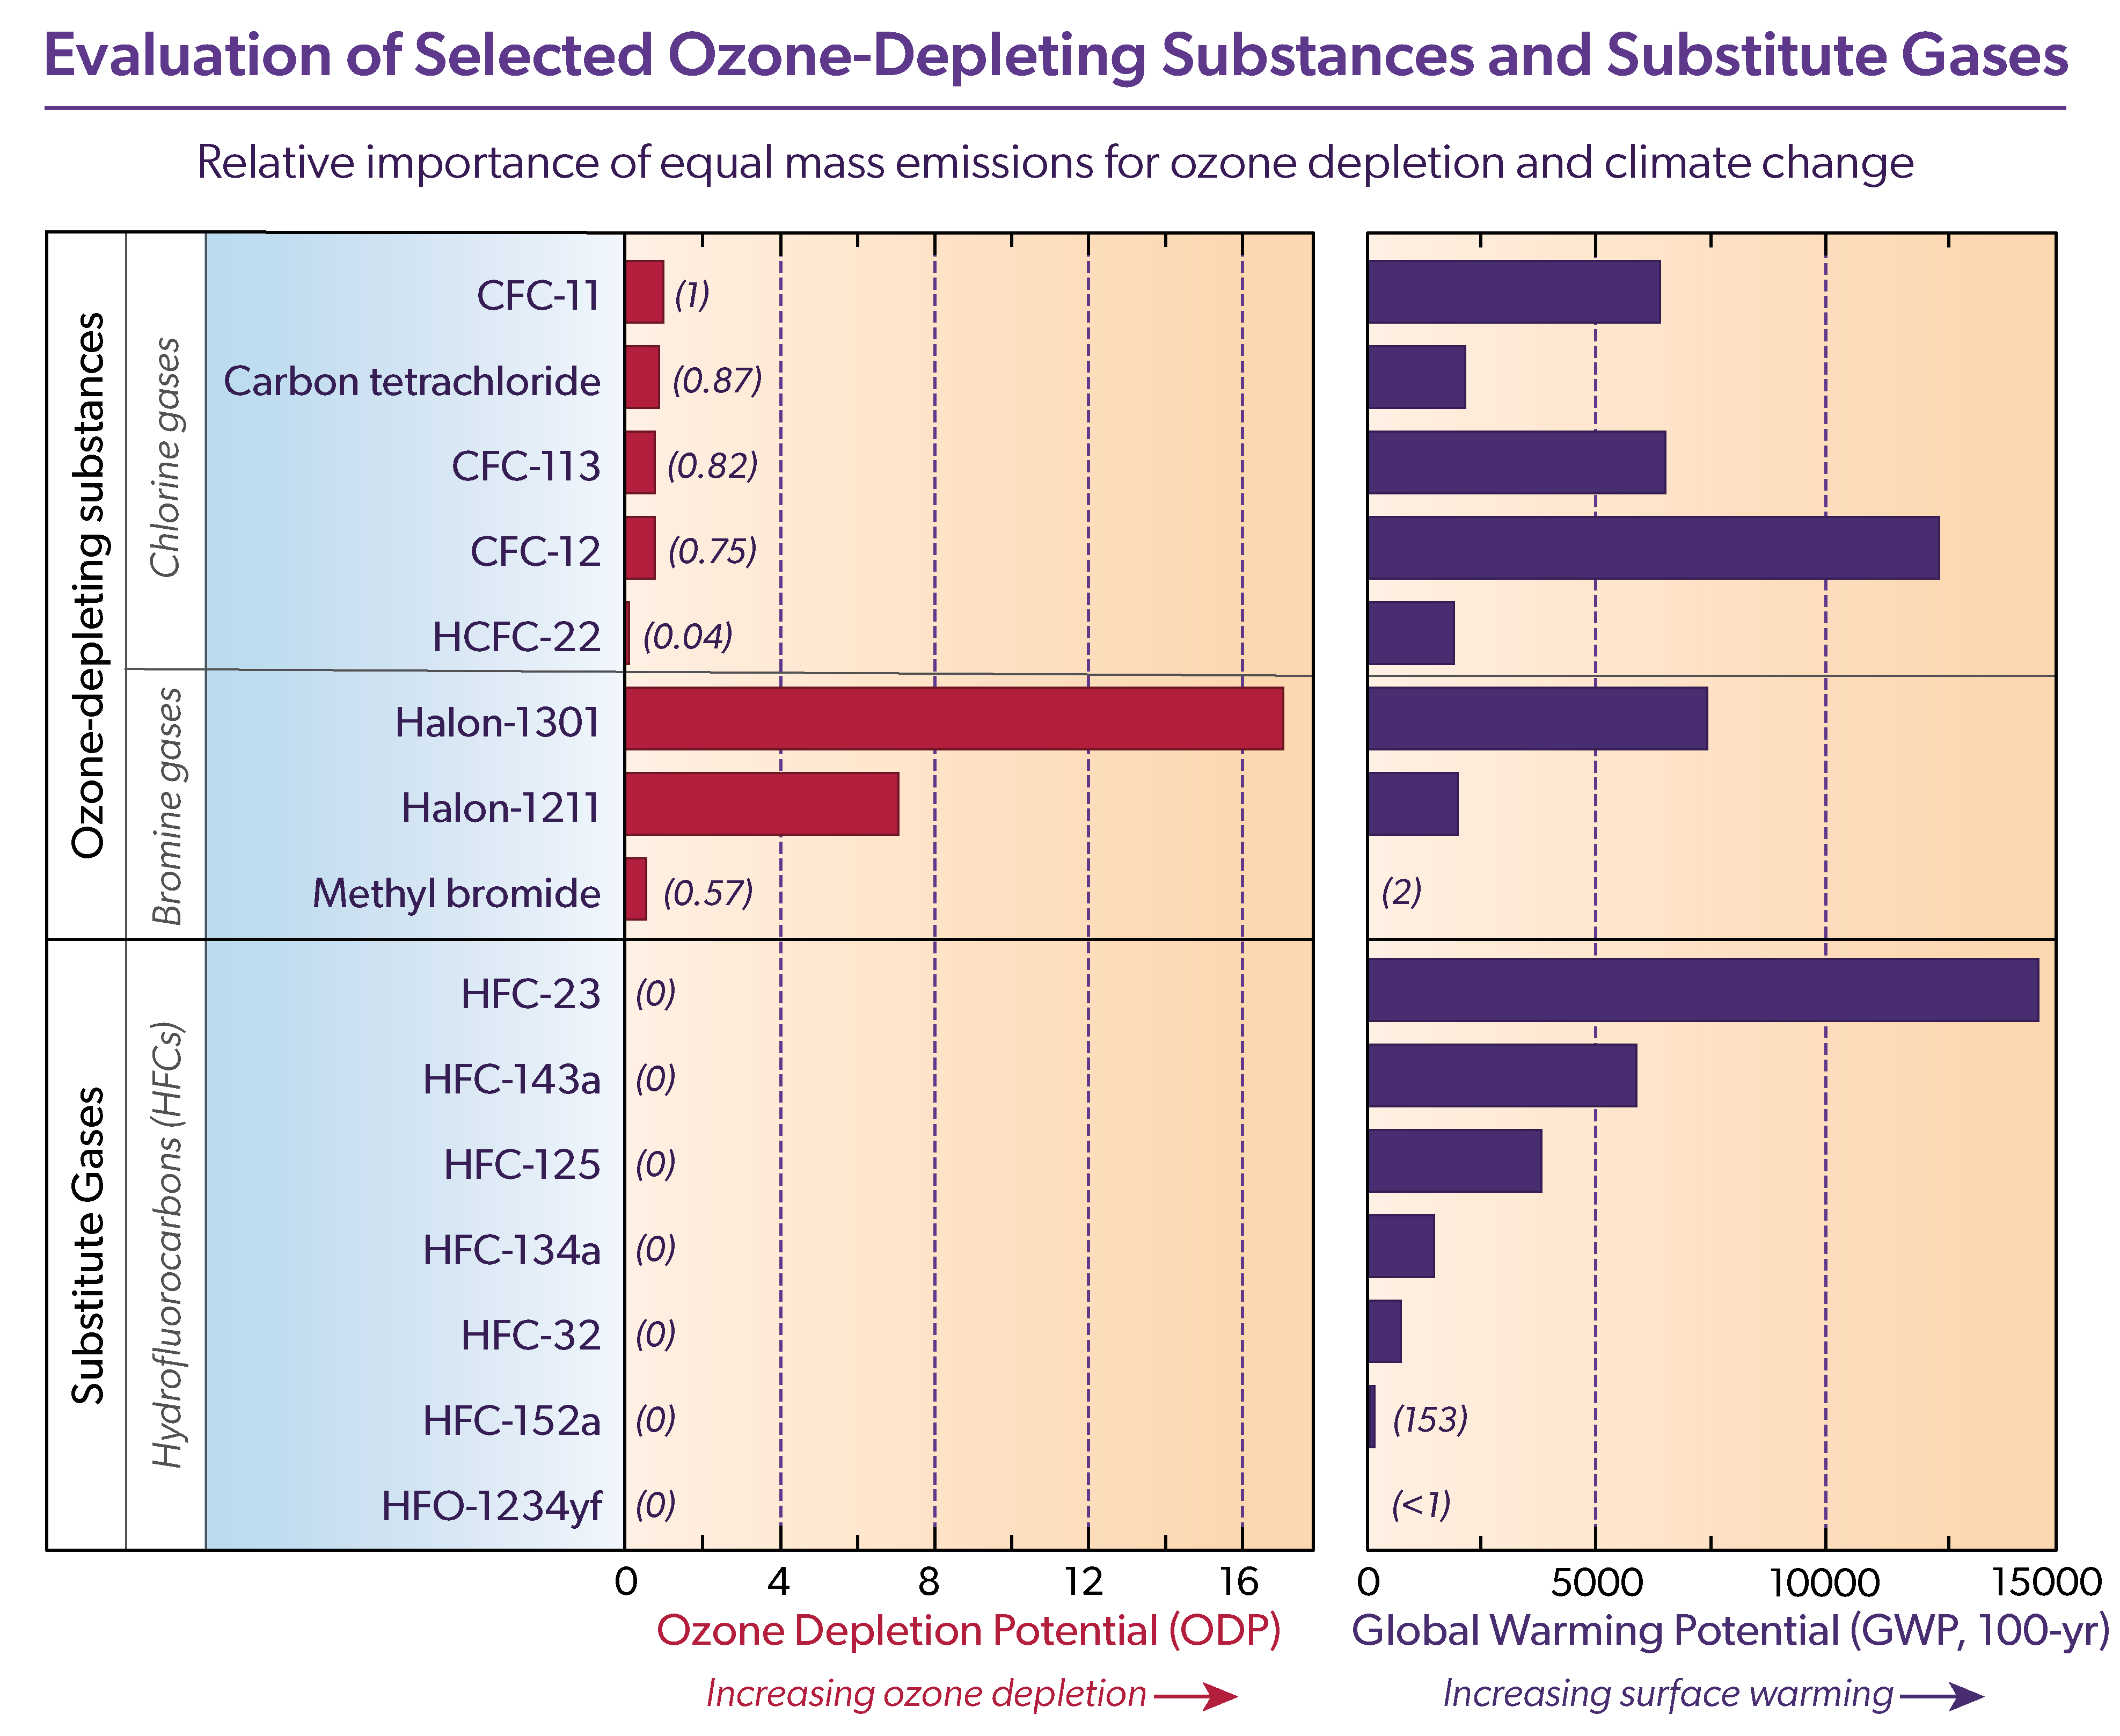 Evaluation of Selected Ozone-Depleting Substances and Substitute Gases